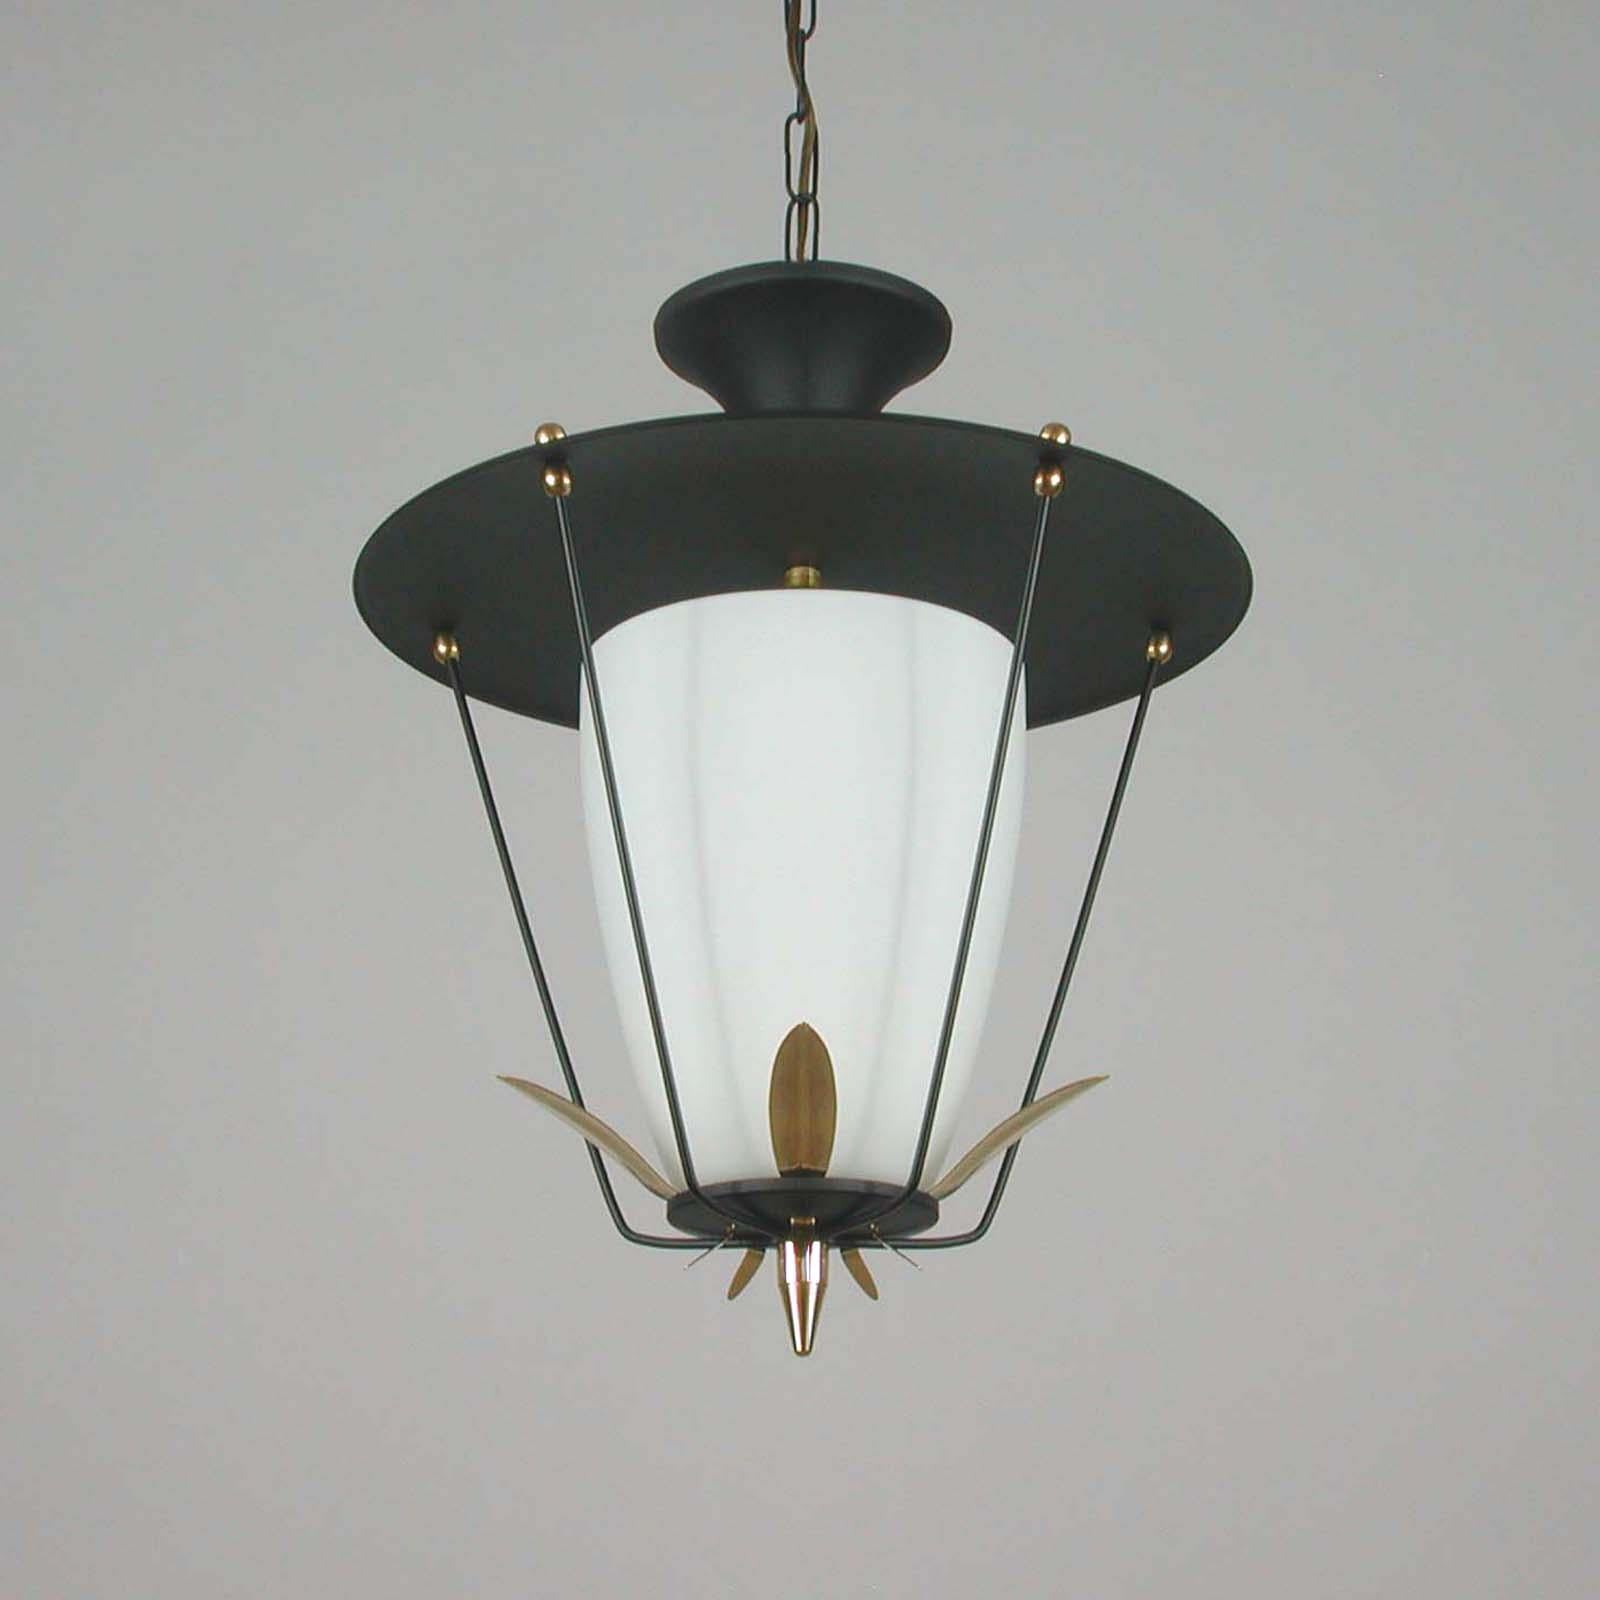 Mid-Century Modern Midcentury French Black and White Lantern with Brass Details, 1950s